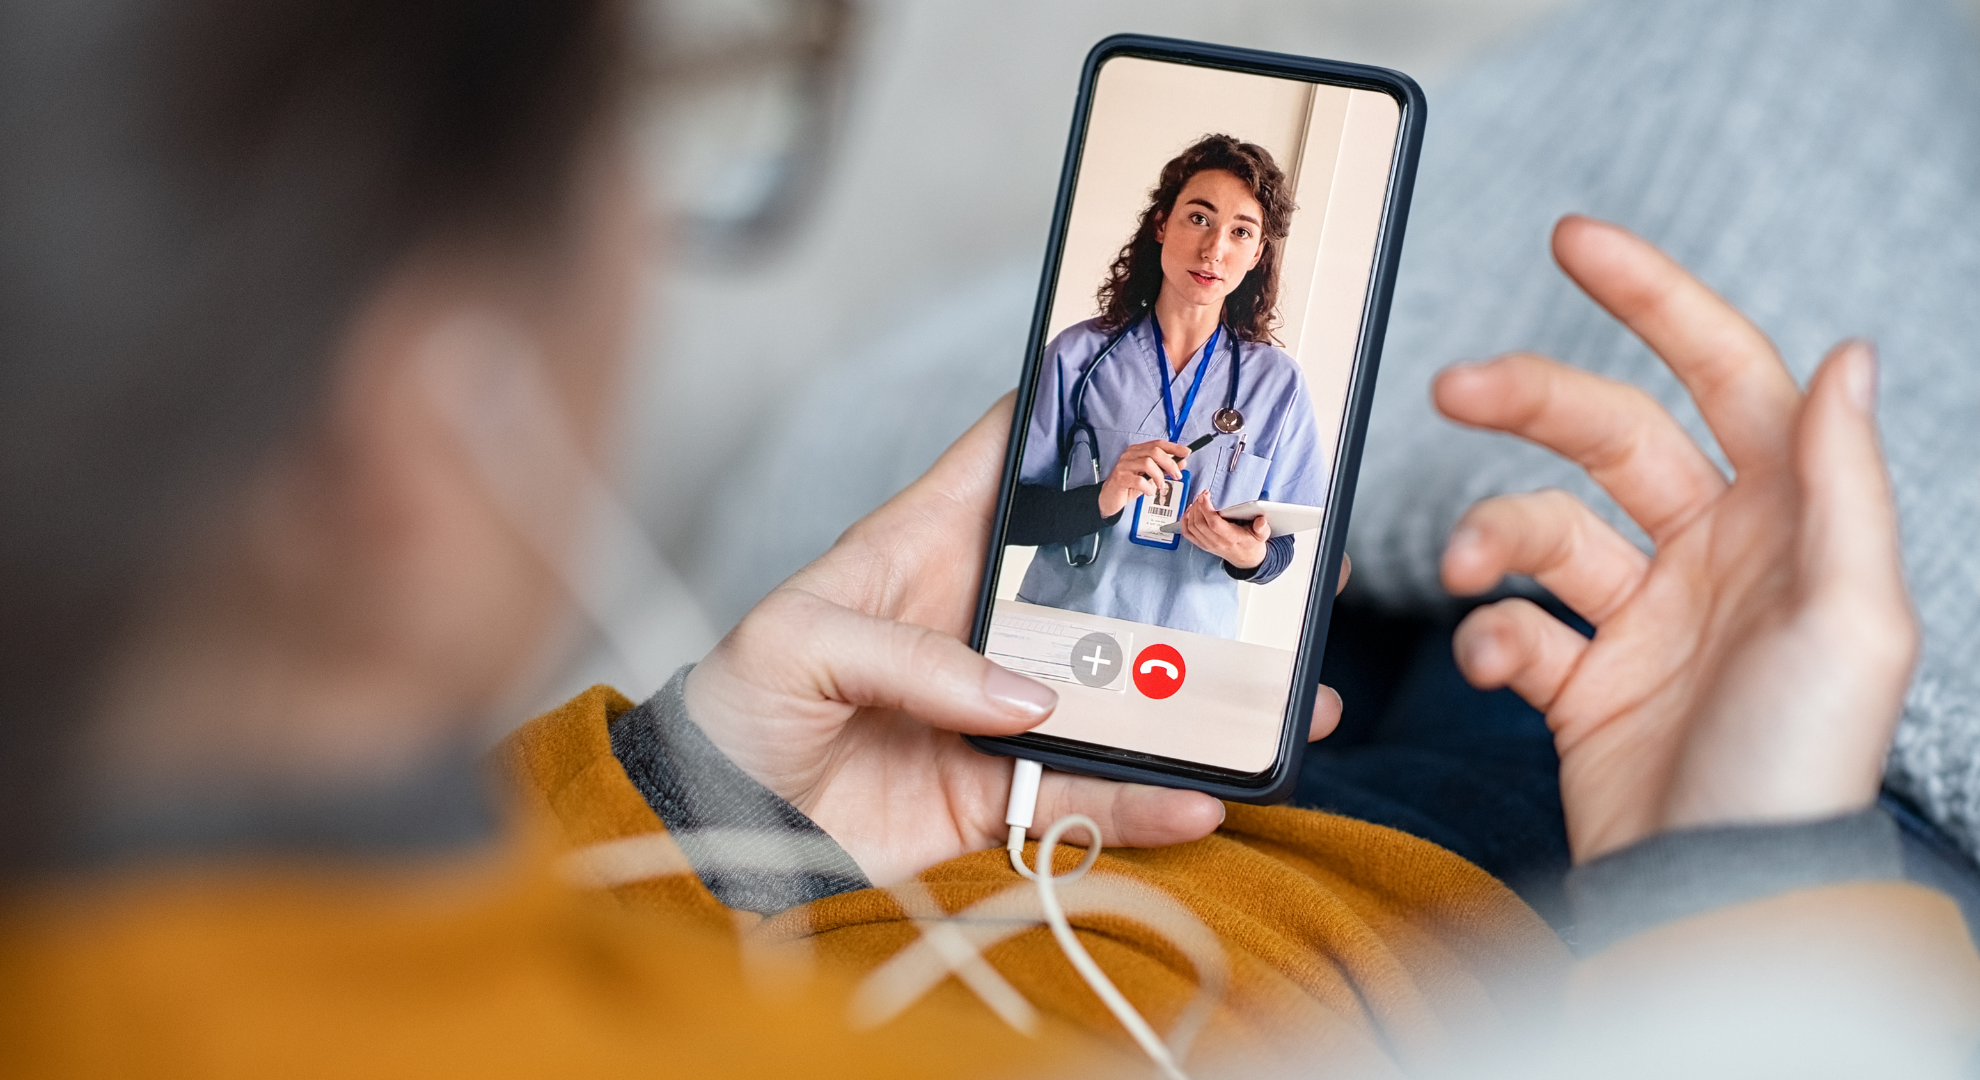 Provider- Patient interaction on telehealth